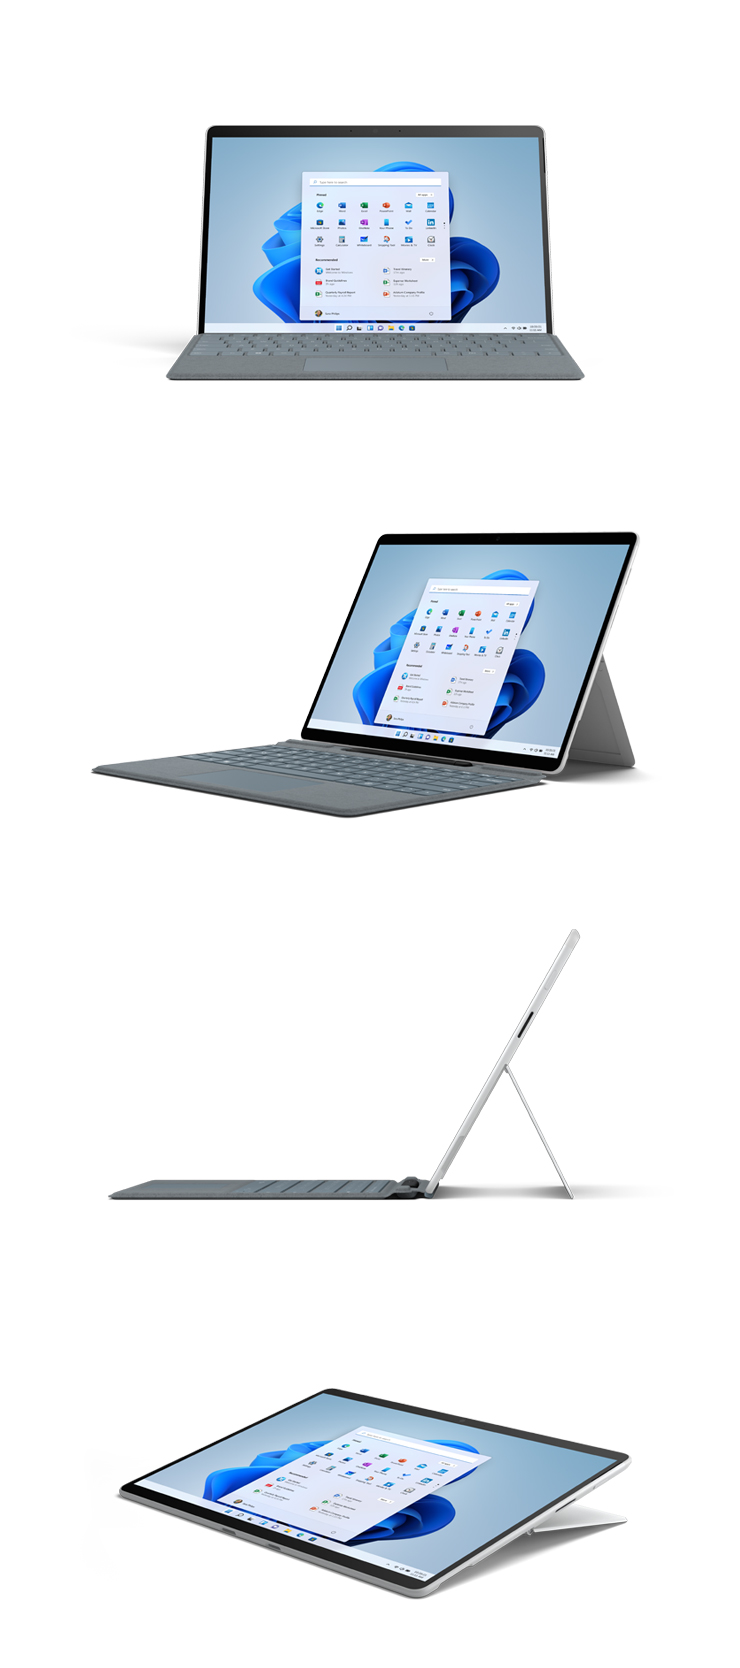 Renders of Platinum Surface Pro X from straight on, angled, side view and studio mode.